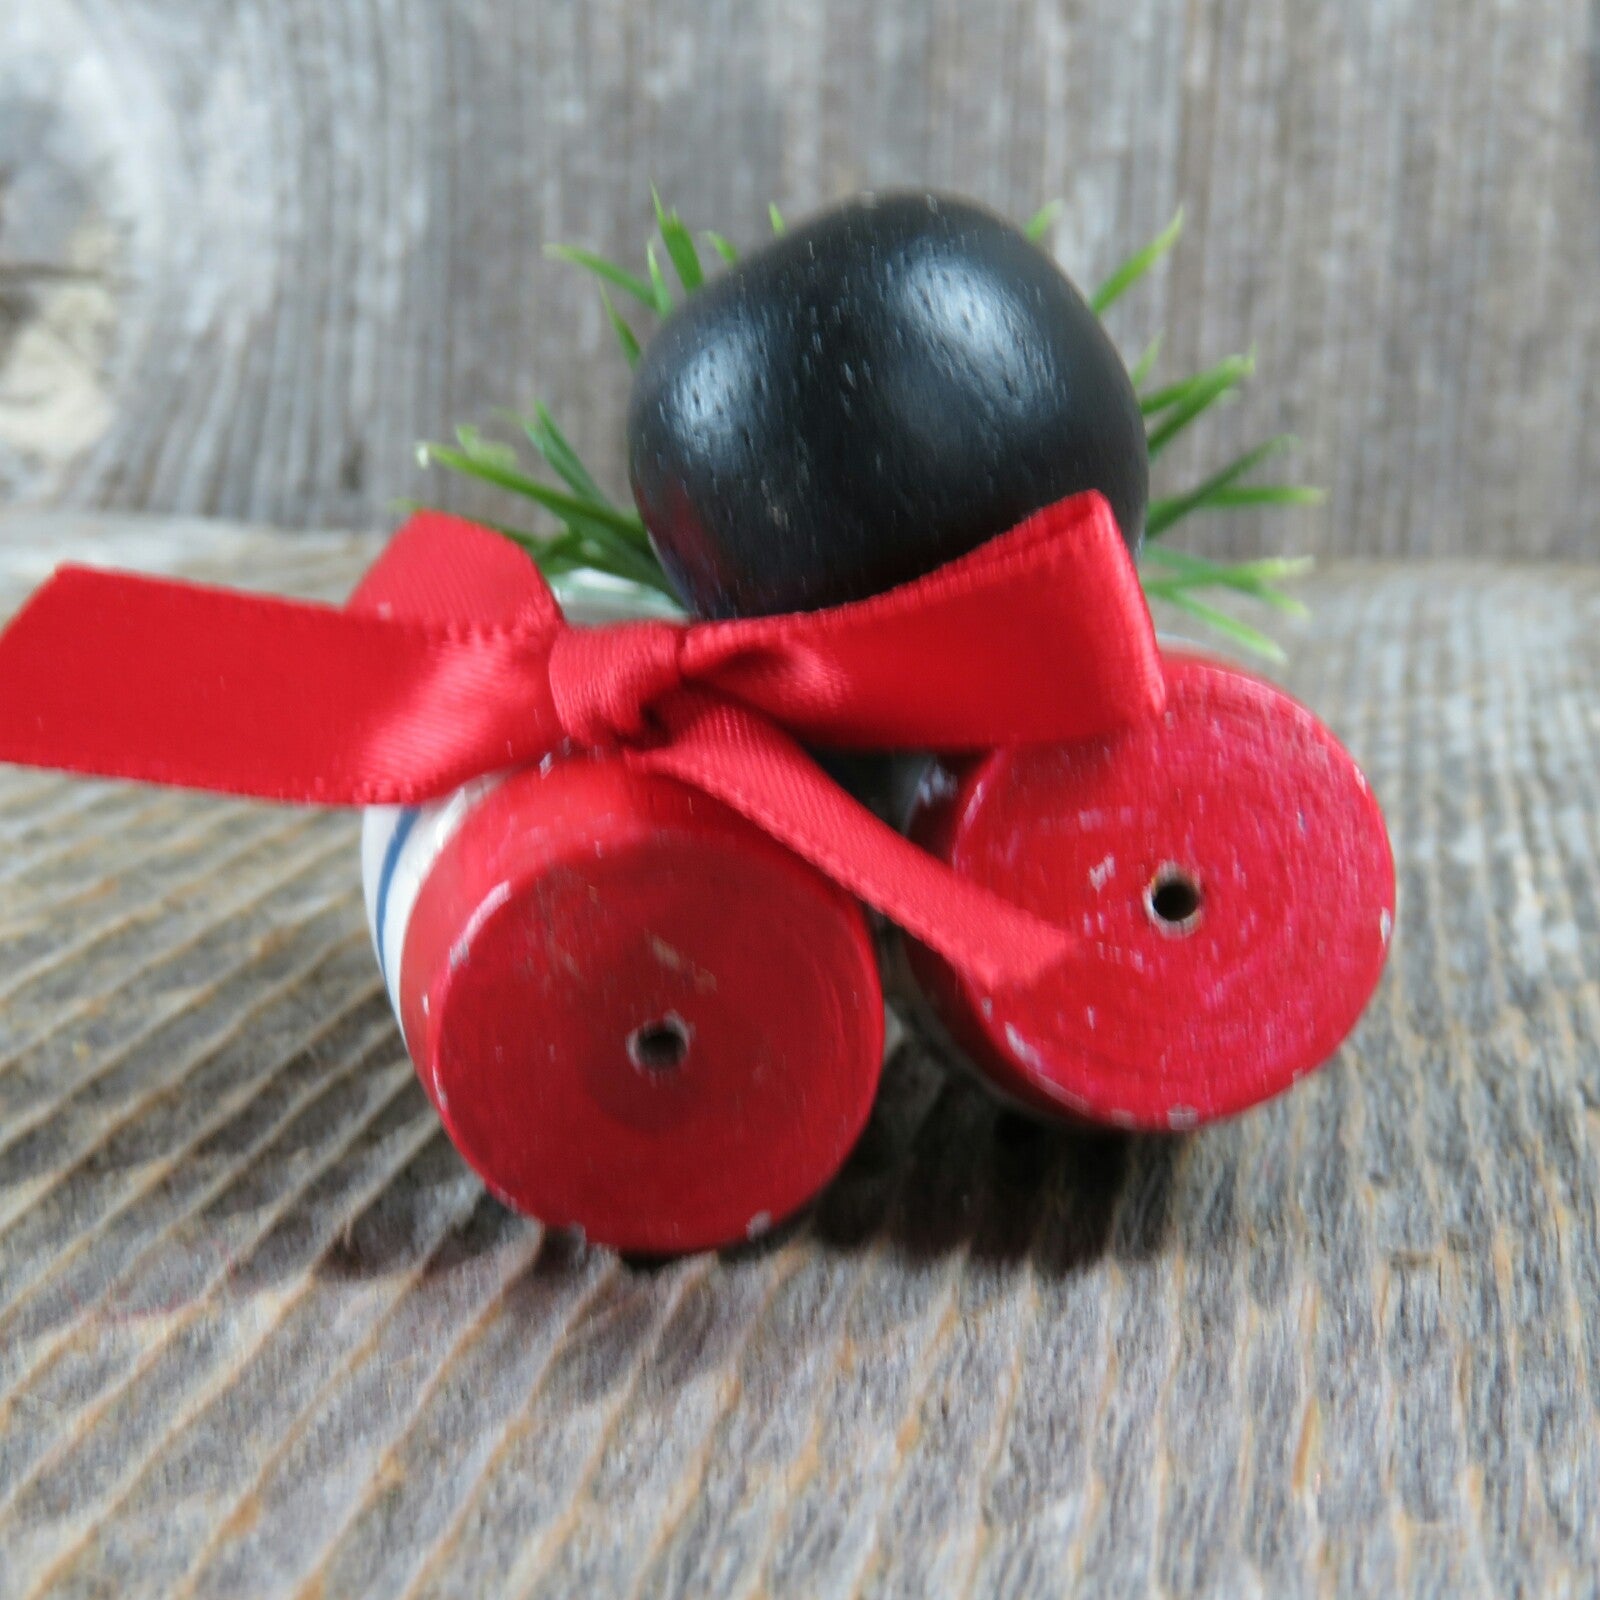 Vintage Bowling Ball and Pins Wood Christmas Ornament with Red Bow Holiday Decor - At Grandma's Table